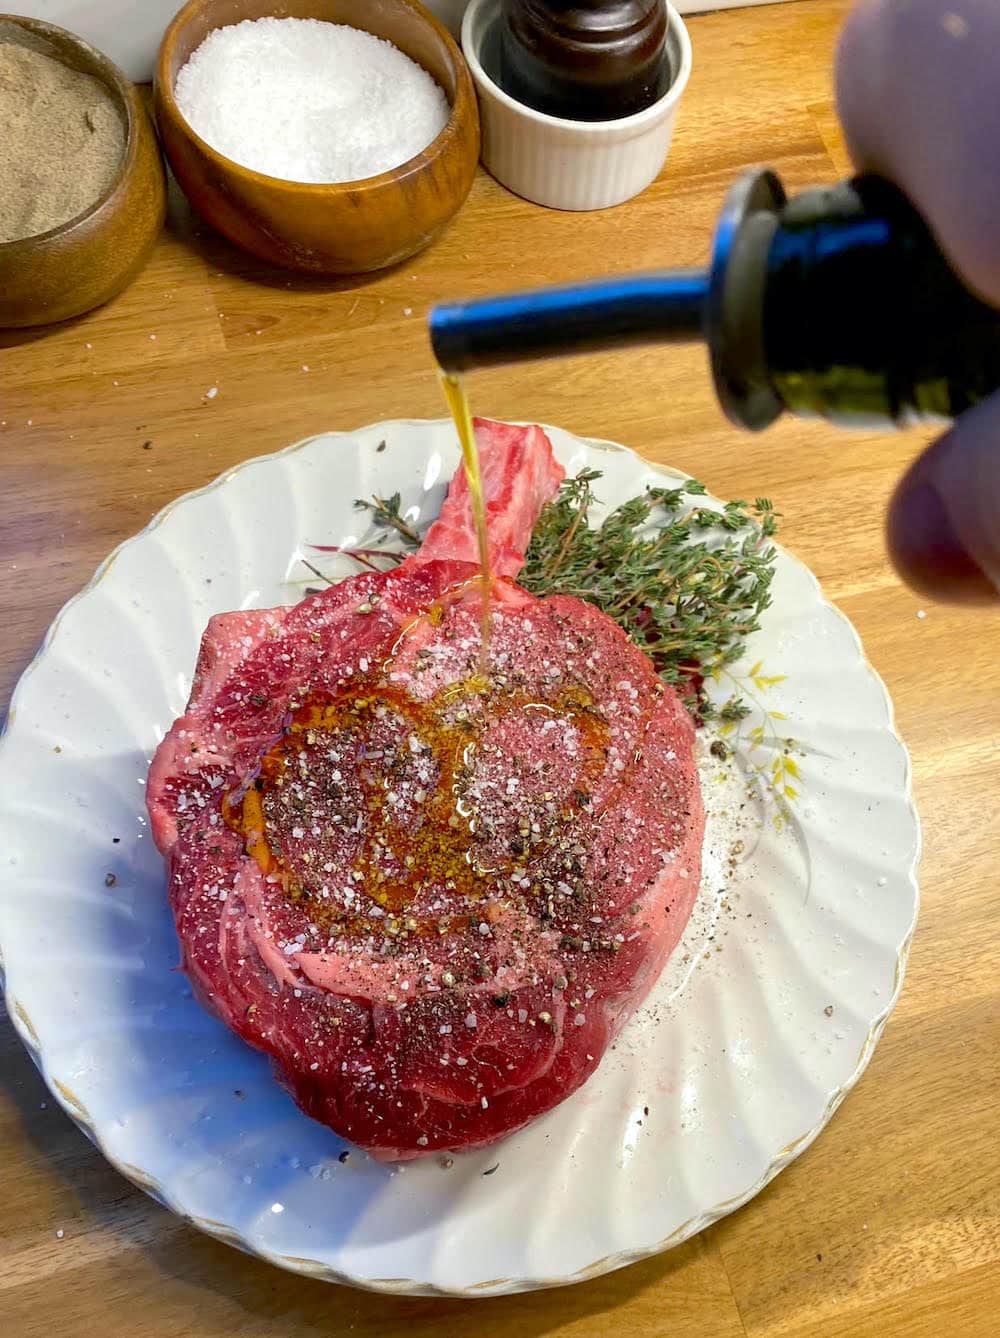 Adding seasoning and olive oil to the steak